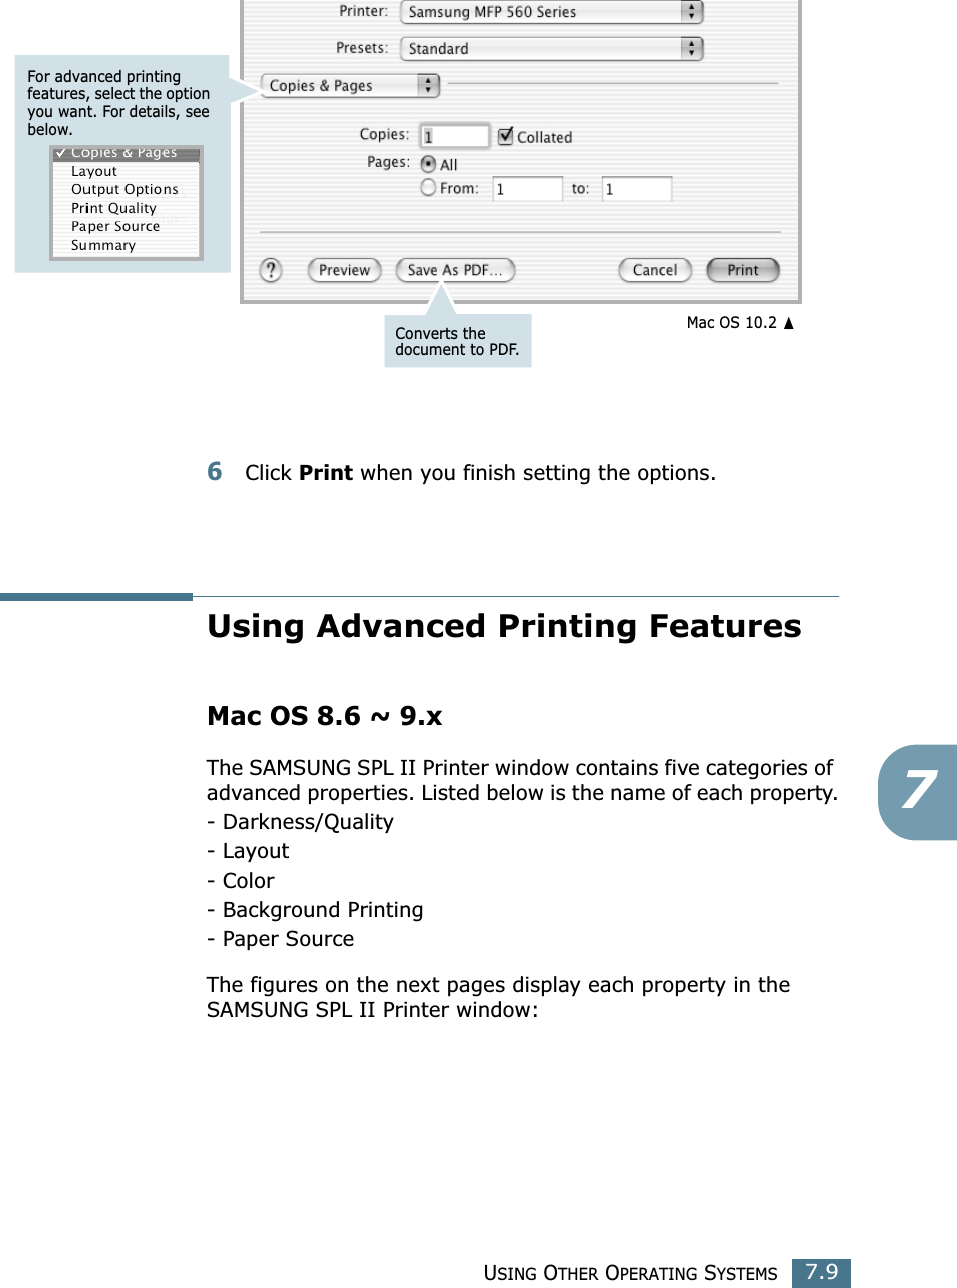 USING OTHER OPERATING SYSTEMS7.976Click Print when you finish setting the options.Using Advanced Printing FeaturesMac OS 8.6 ~ 9.xThe SAMSUNG SPL II Printer window contains five categories of advanced properties. Listed below is the name of each property.- Darkness/Quality- Layout- Color- Background Printing- Paper SourceThe figures on the next pages display each property in the SAMSUNG SPL II Printer window:For advanced printing features, select the option you want. For details, see below.Converts the document to PDF.☎Mac OS 10.2 ➐